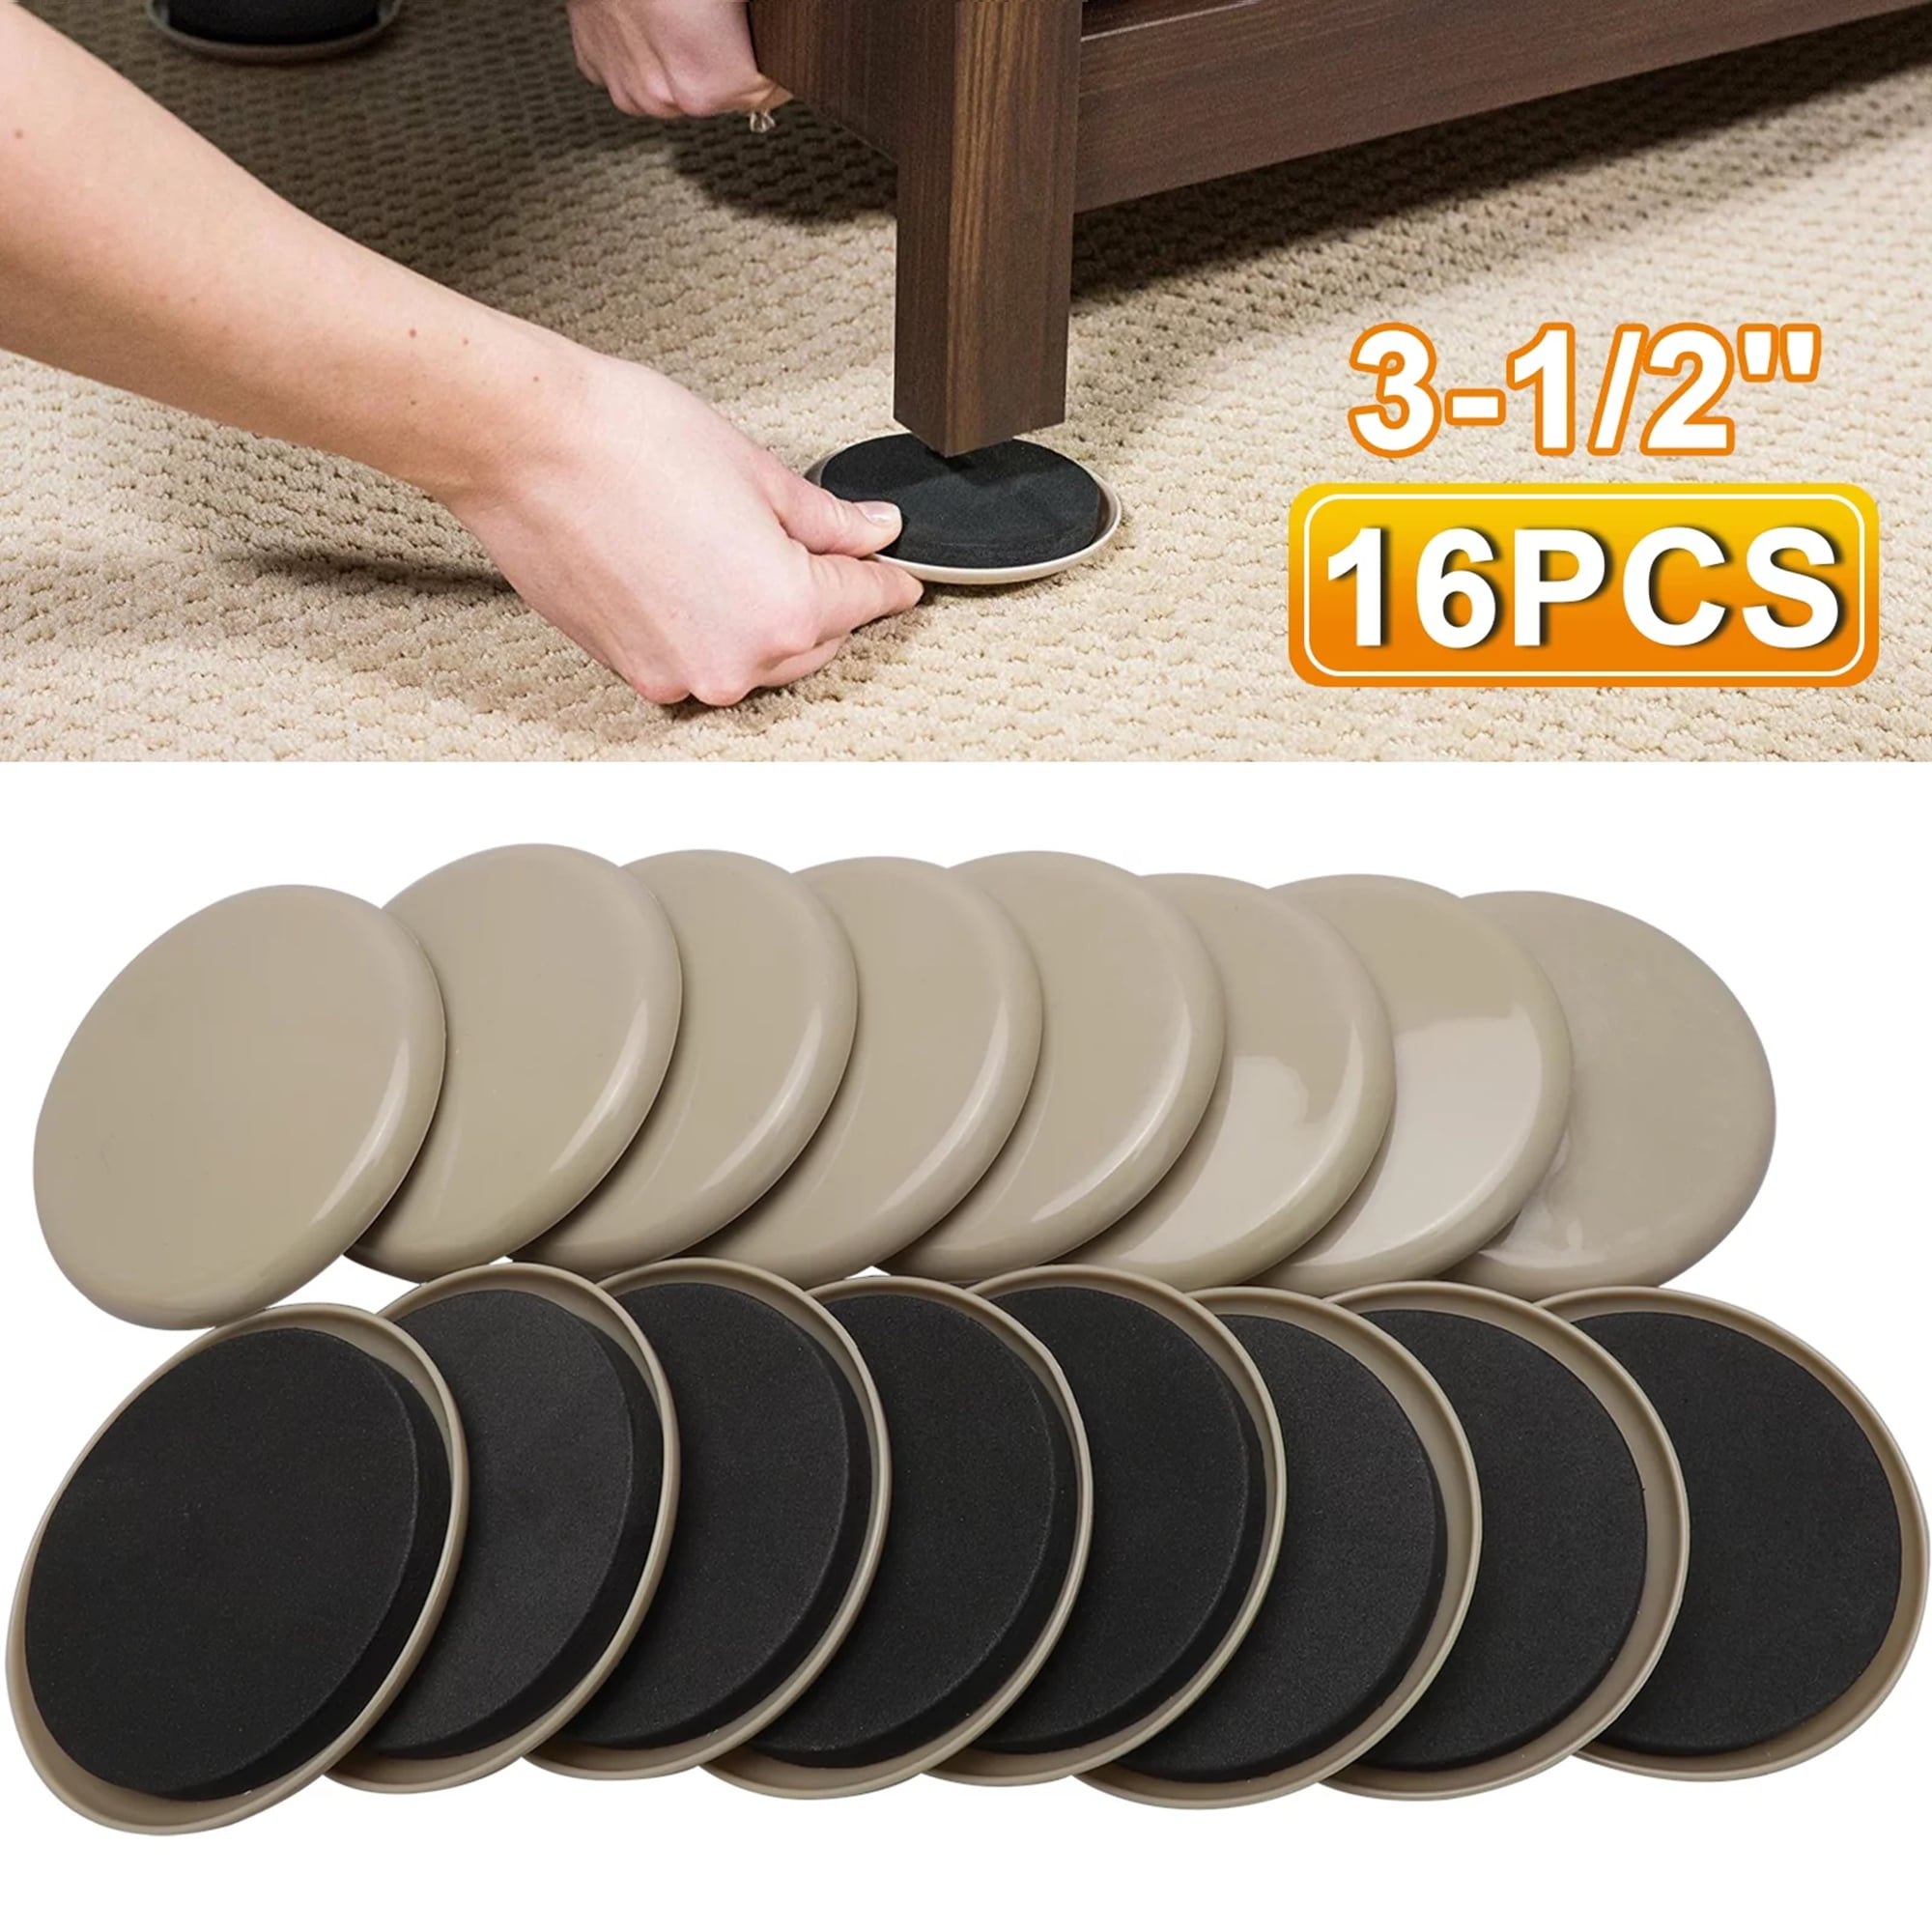 Geege 8pcs Furniture Sliders,Reusable Heavy Furniture Movers,3.3inch Furniture Carpet Moving Pads for Protector Carpet and Hard Floor Surfaces, Men's